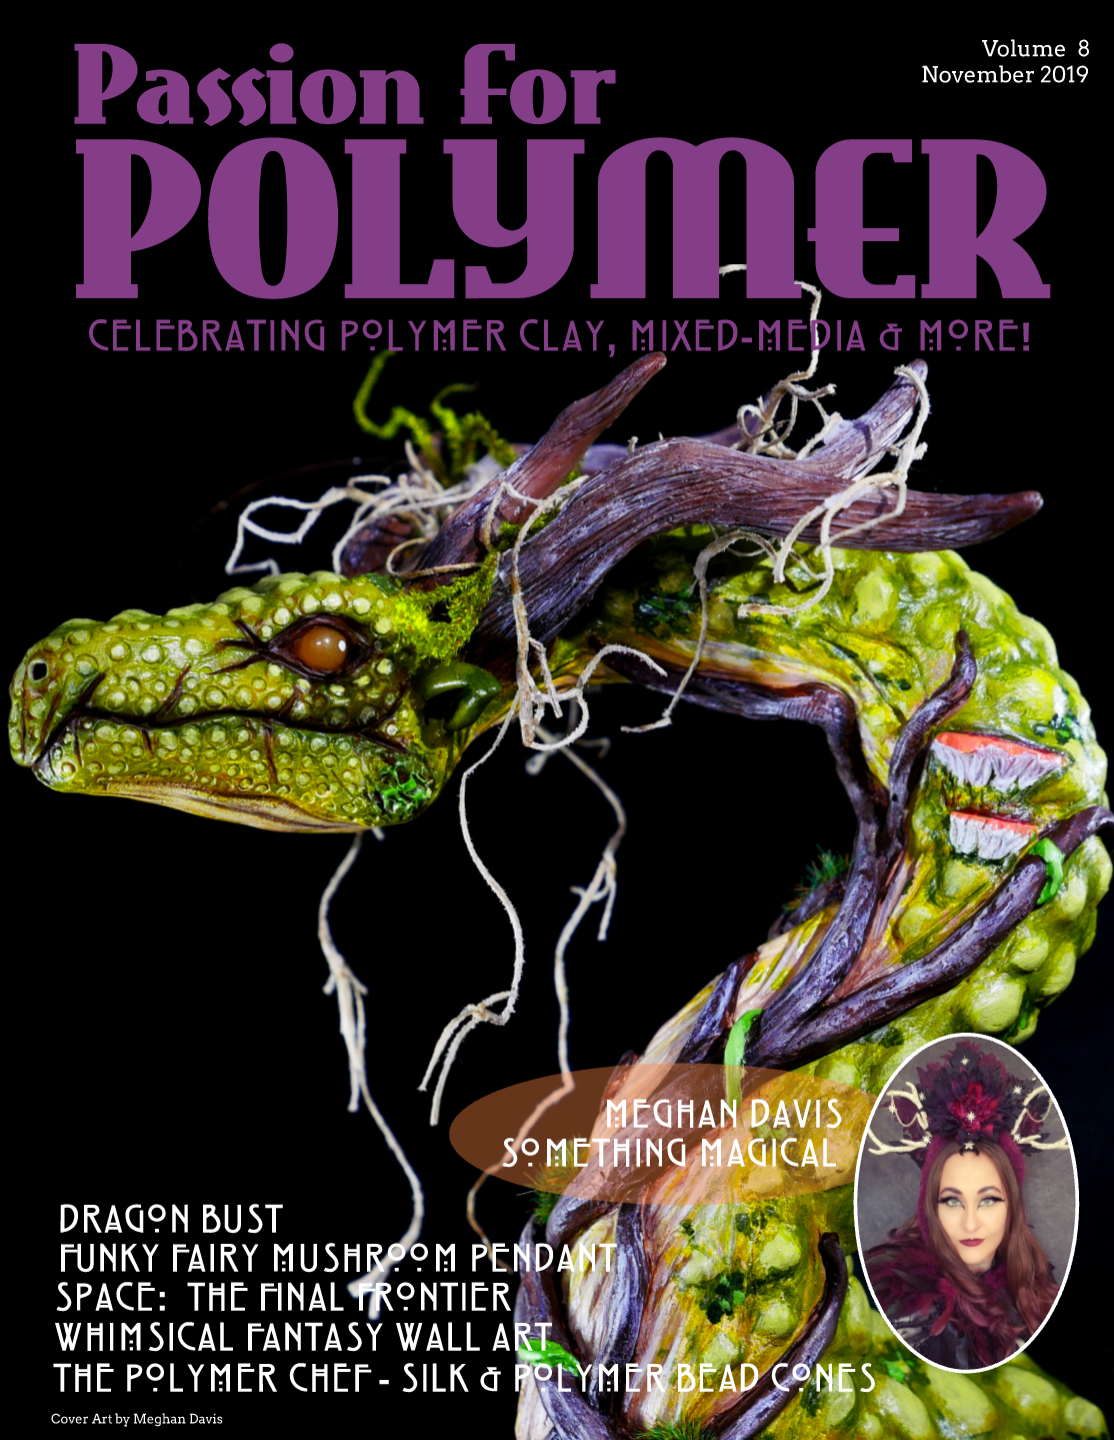 DIGITAL November 2019 download PDF Passion for Polymer clay project book magazine mixed media - Polymer Clay TV tutorial and supplies